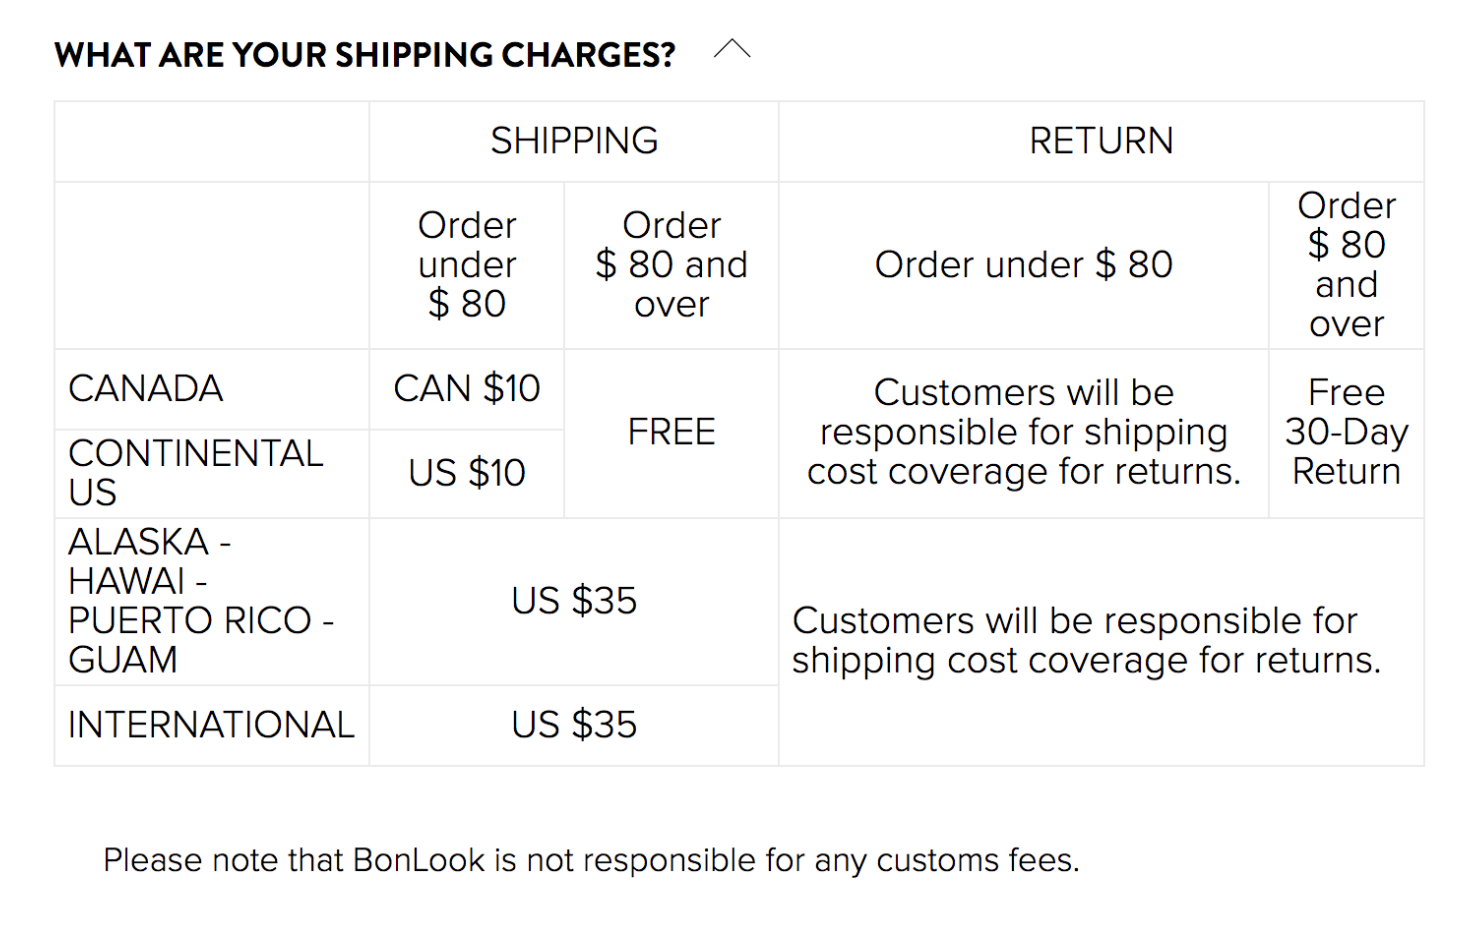 Example of a tabular view of the shipping pricing problem from BonLook's website.